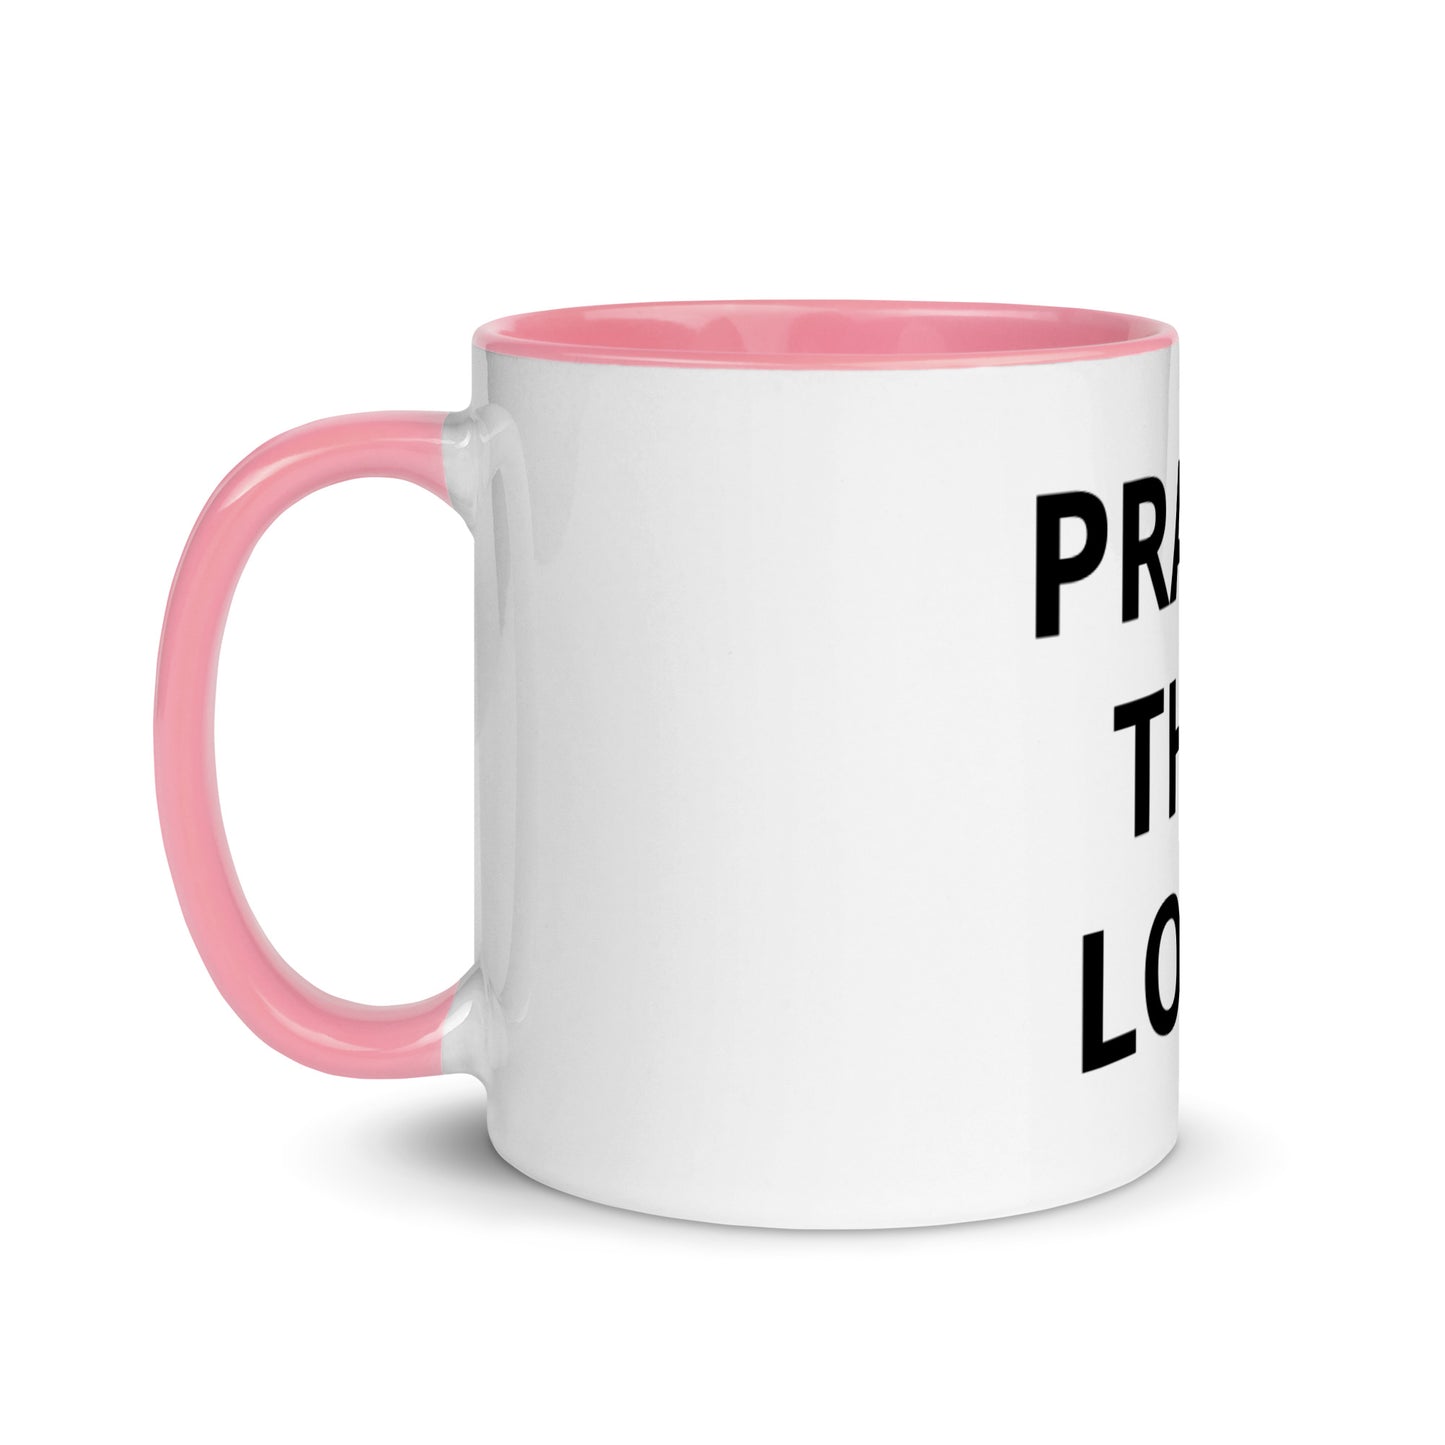 Praise The Lord White Ceramic Mug with Color Inside